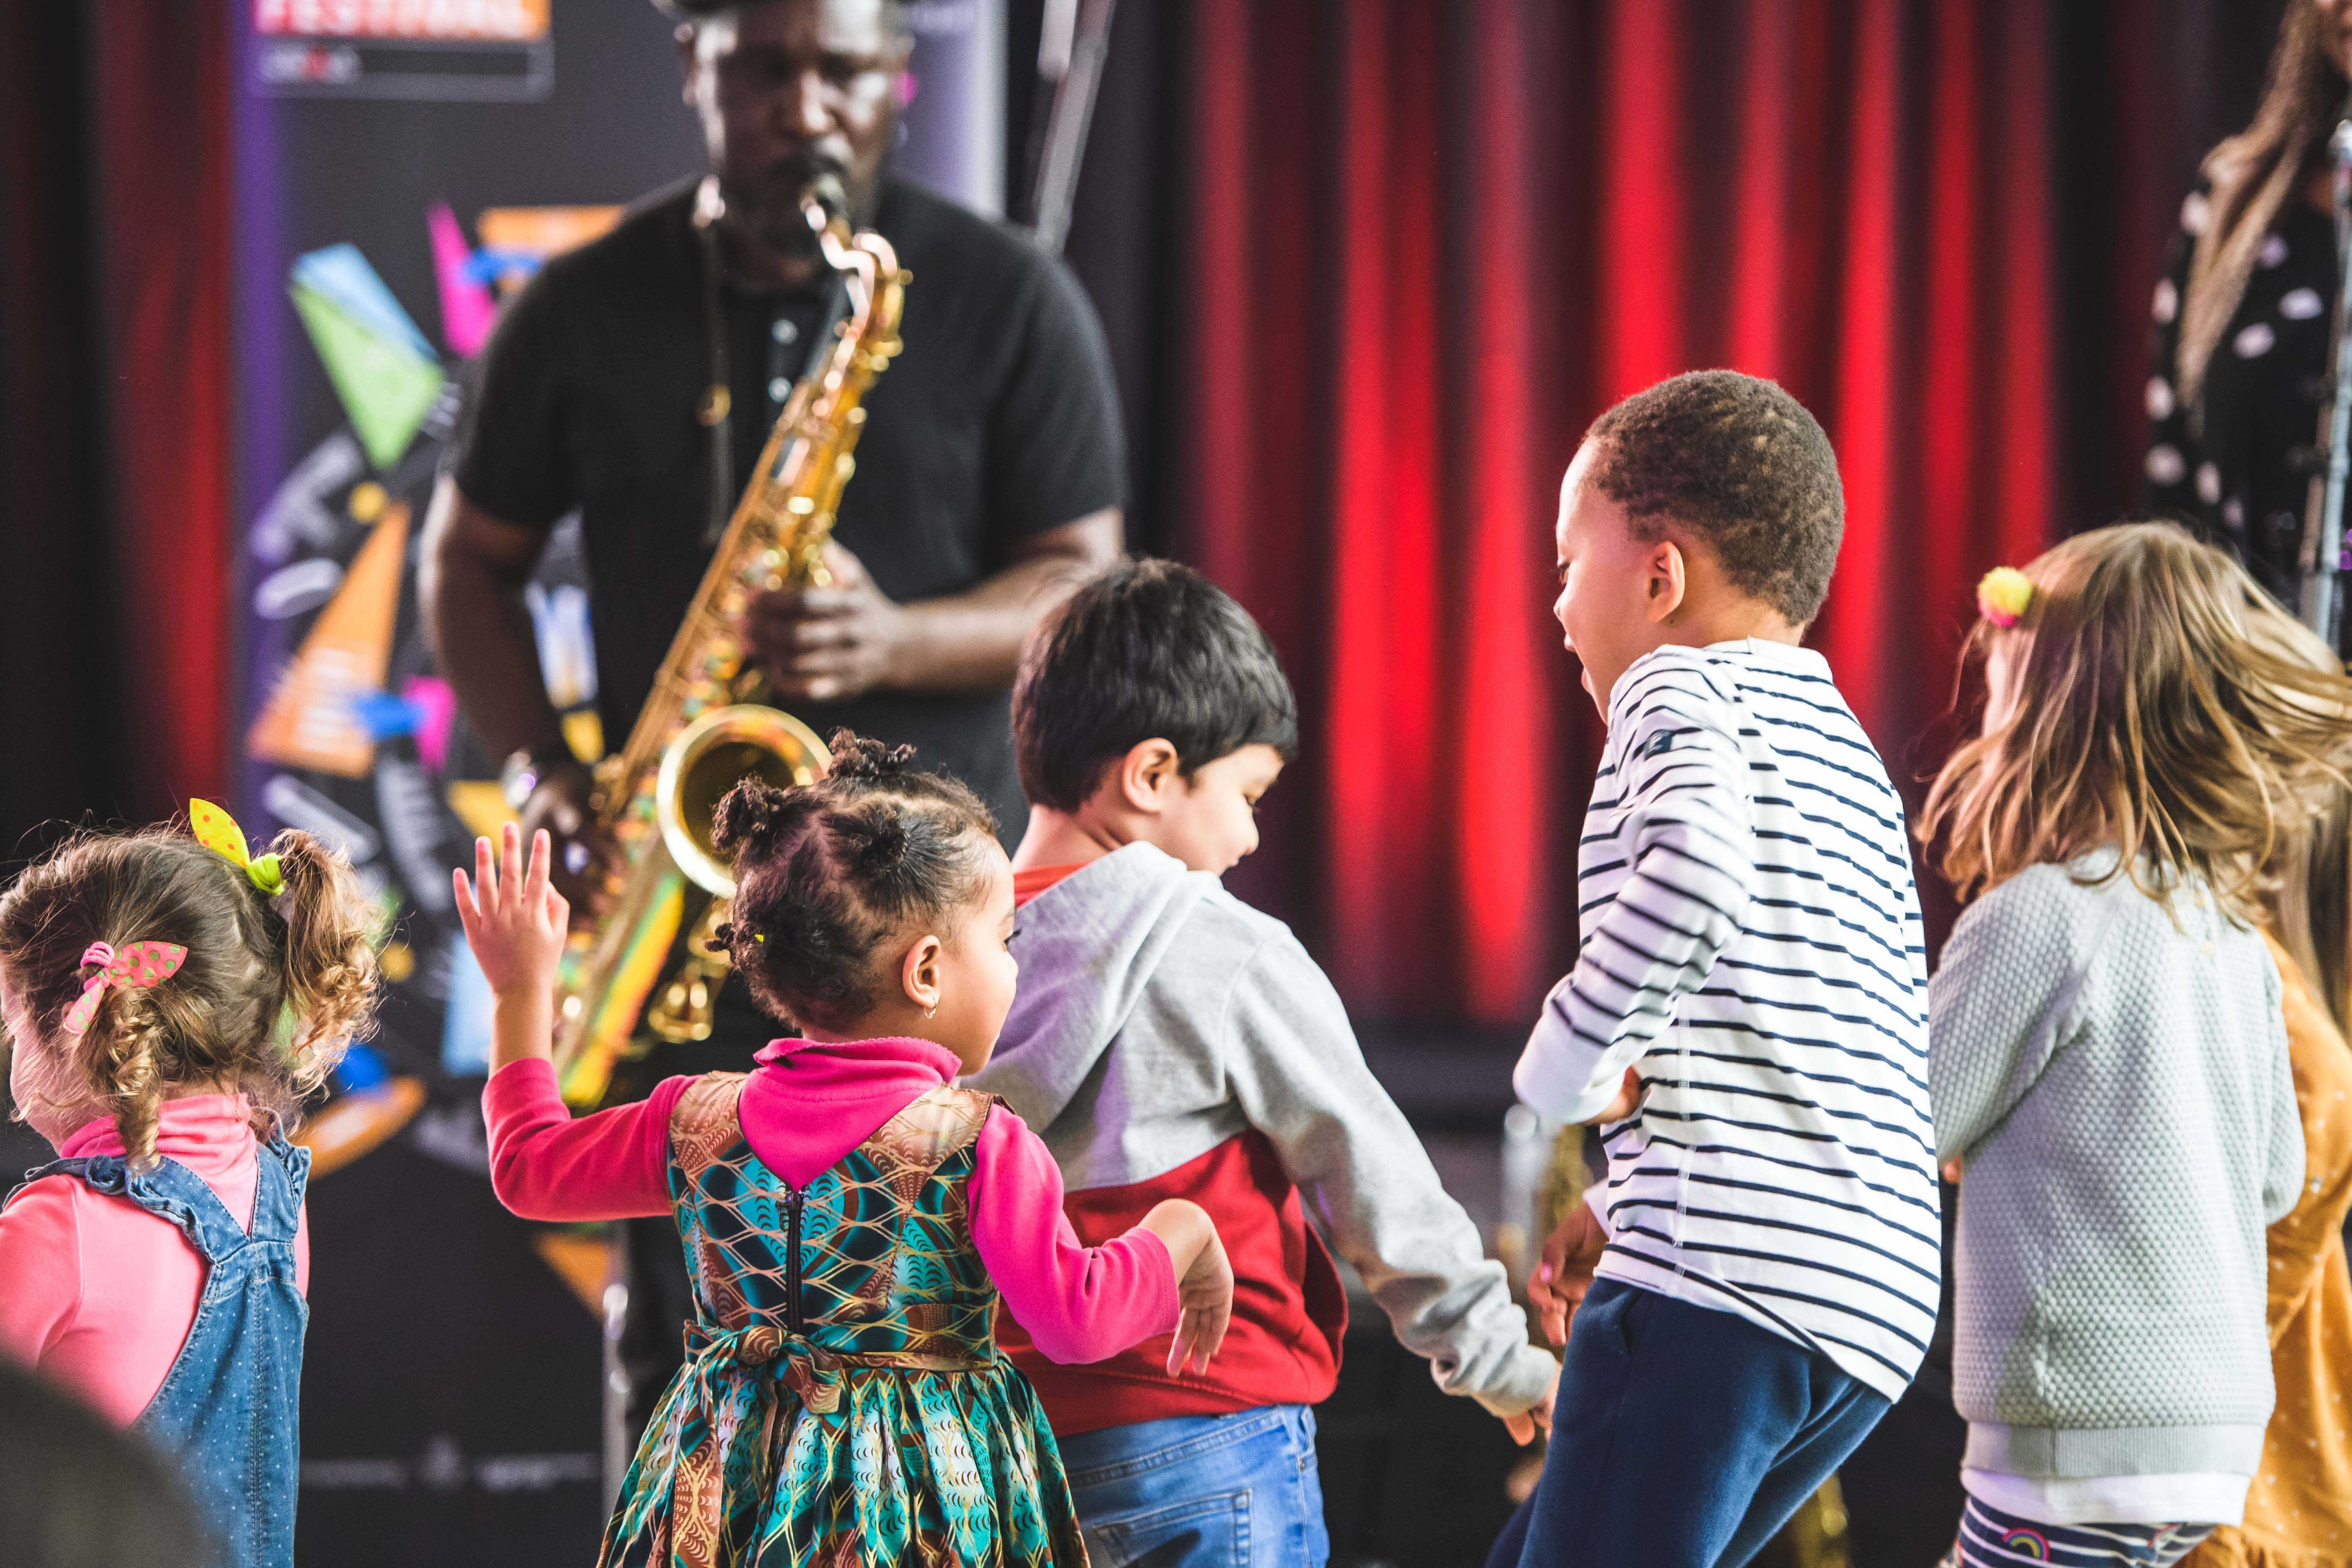 Jazz for toddlers at the EFG Jazz Festival